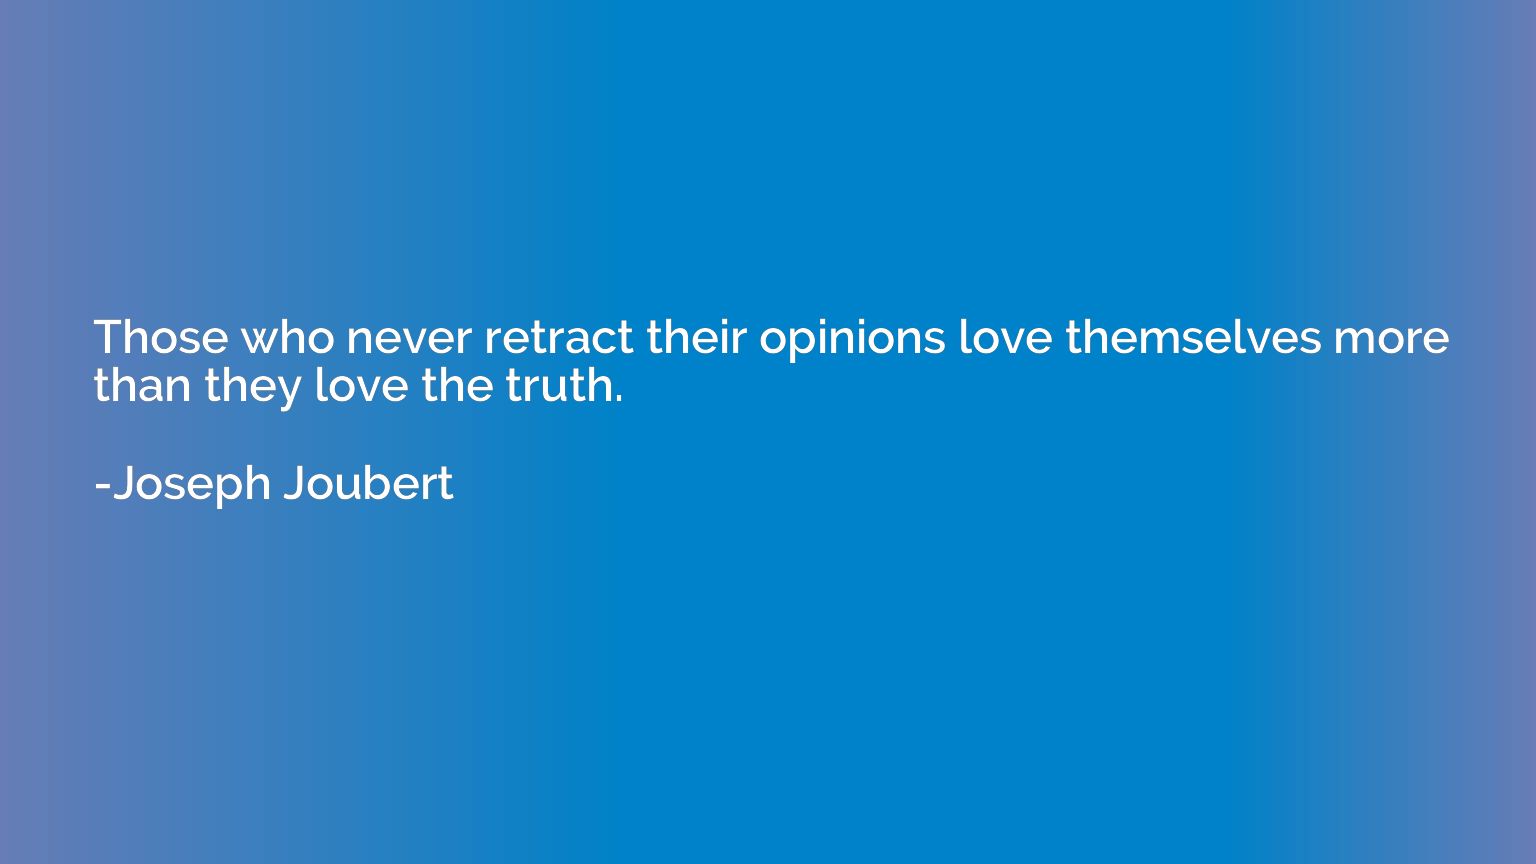 Those who never retract their opinions love themselves more 